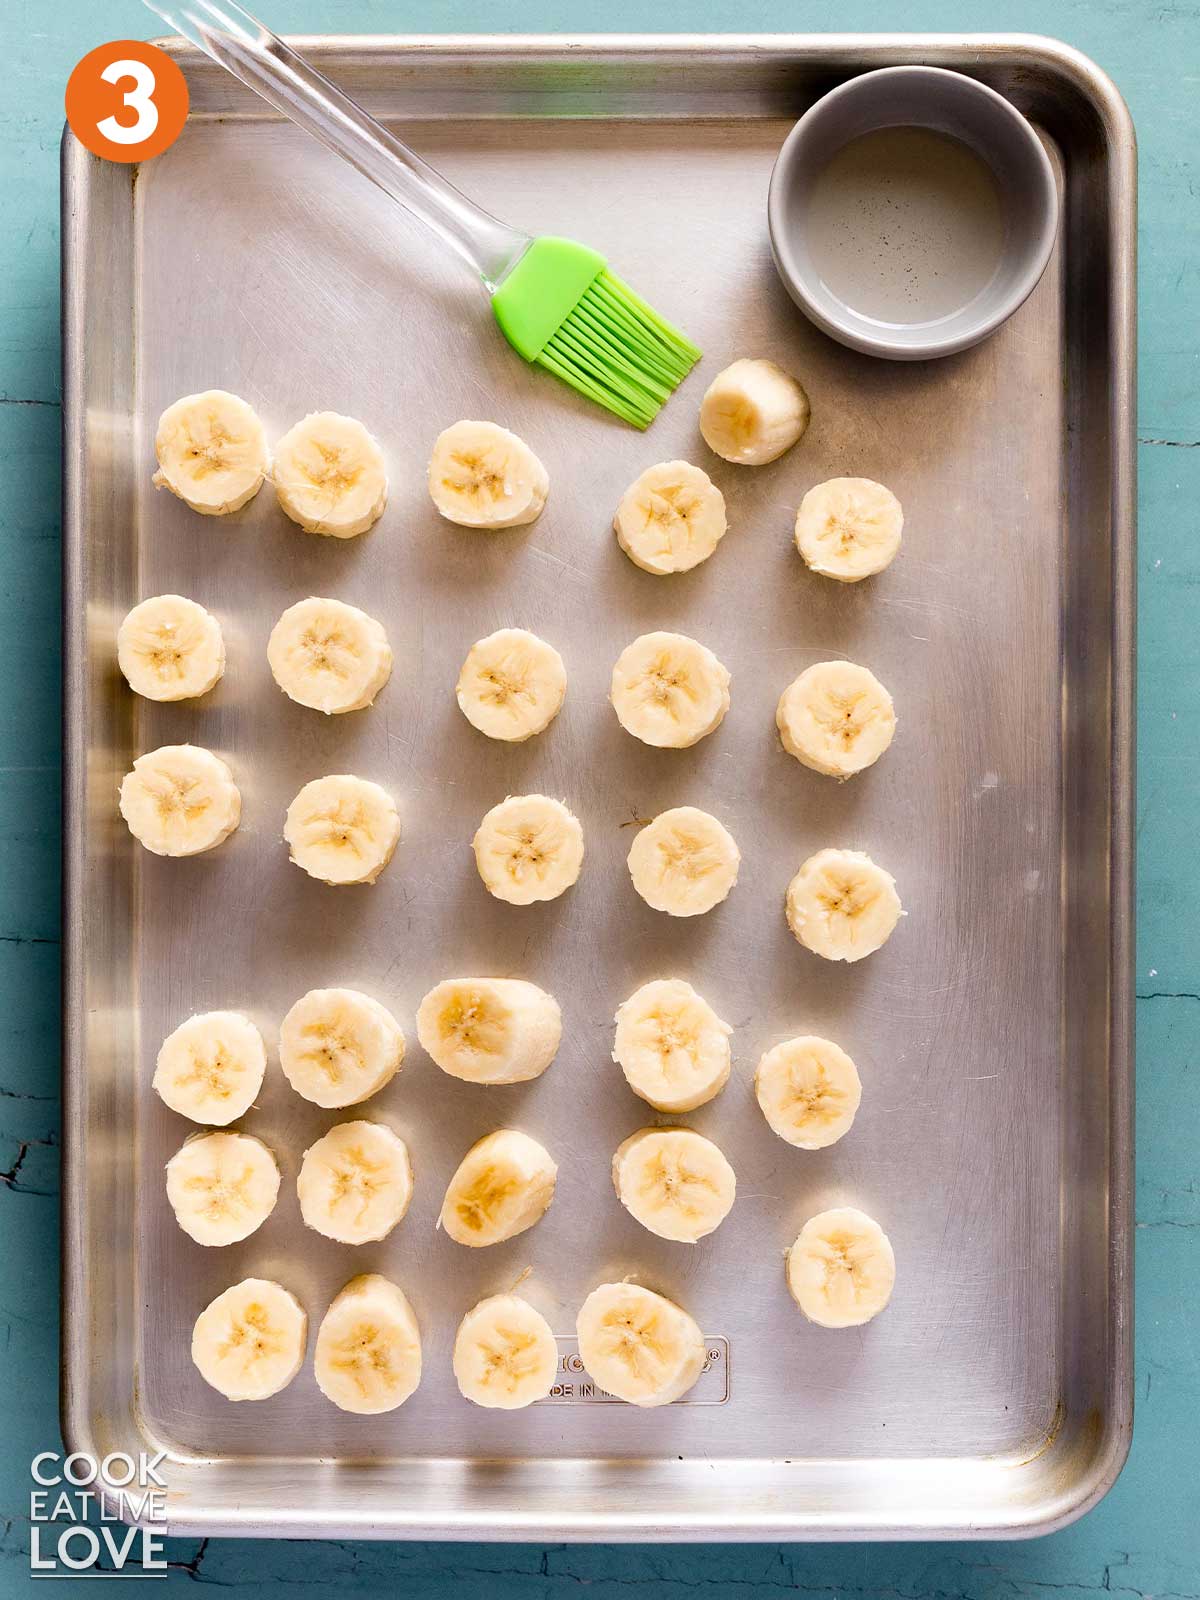 Cut bananas laid out on a baking tray with coconut oil and pastry brush.